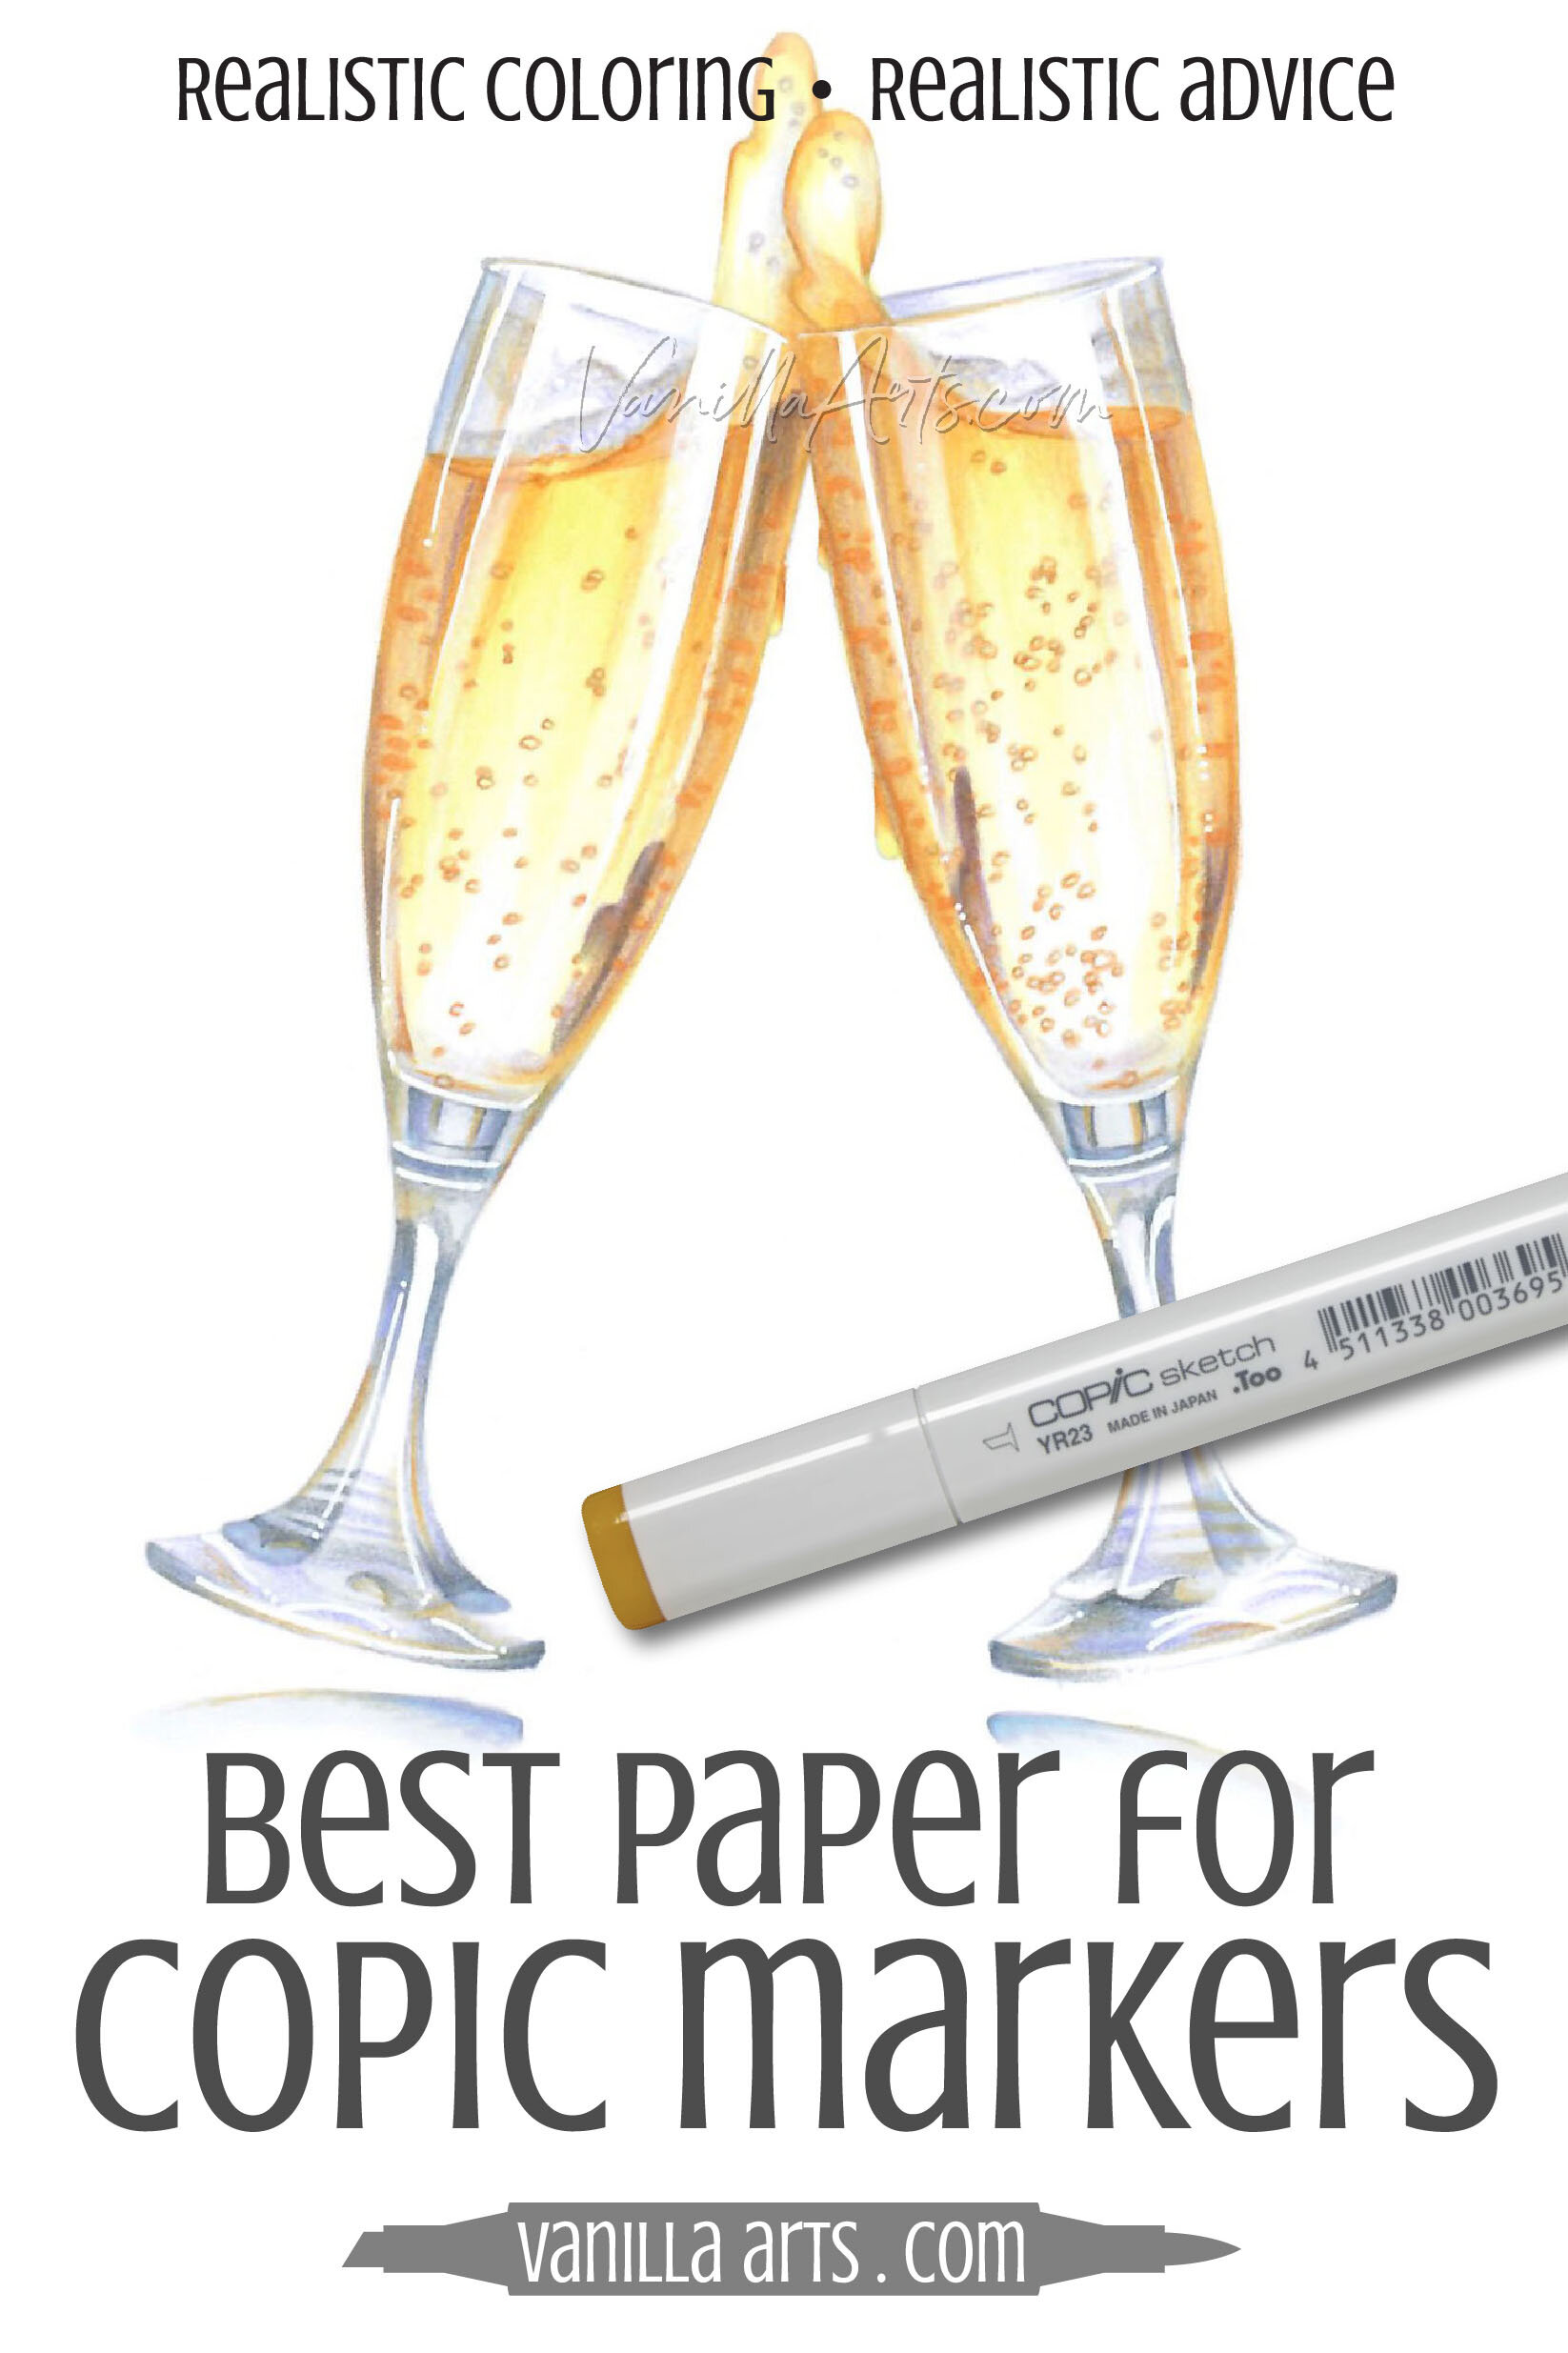 Best Paper for Markers –